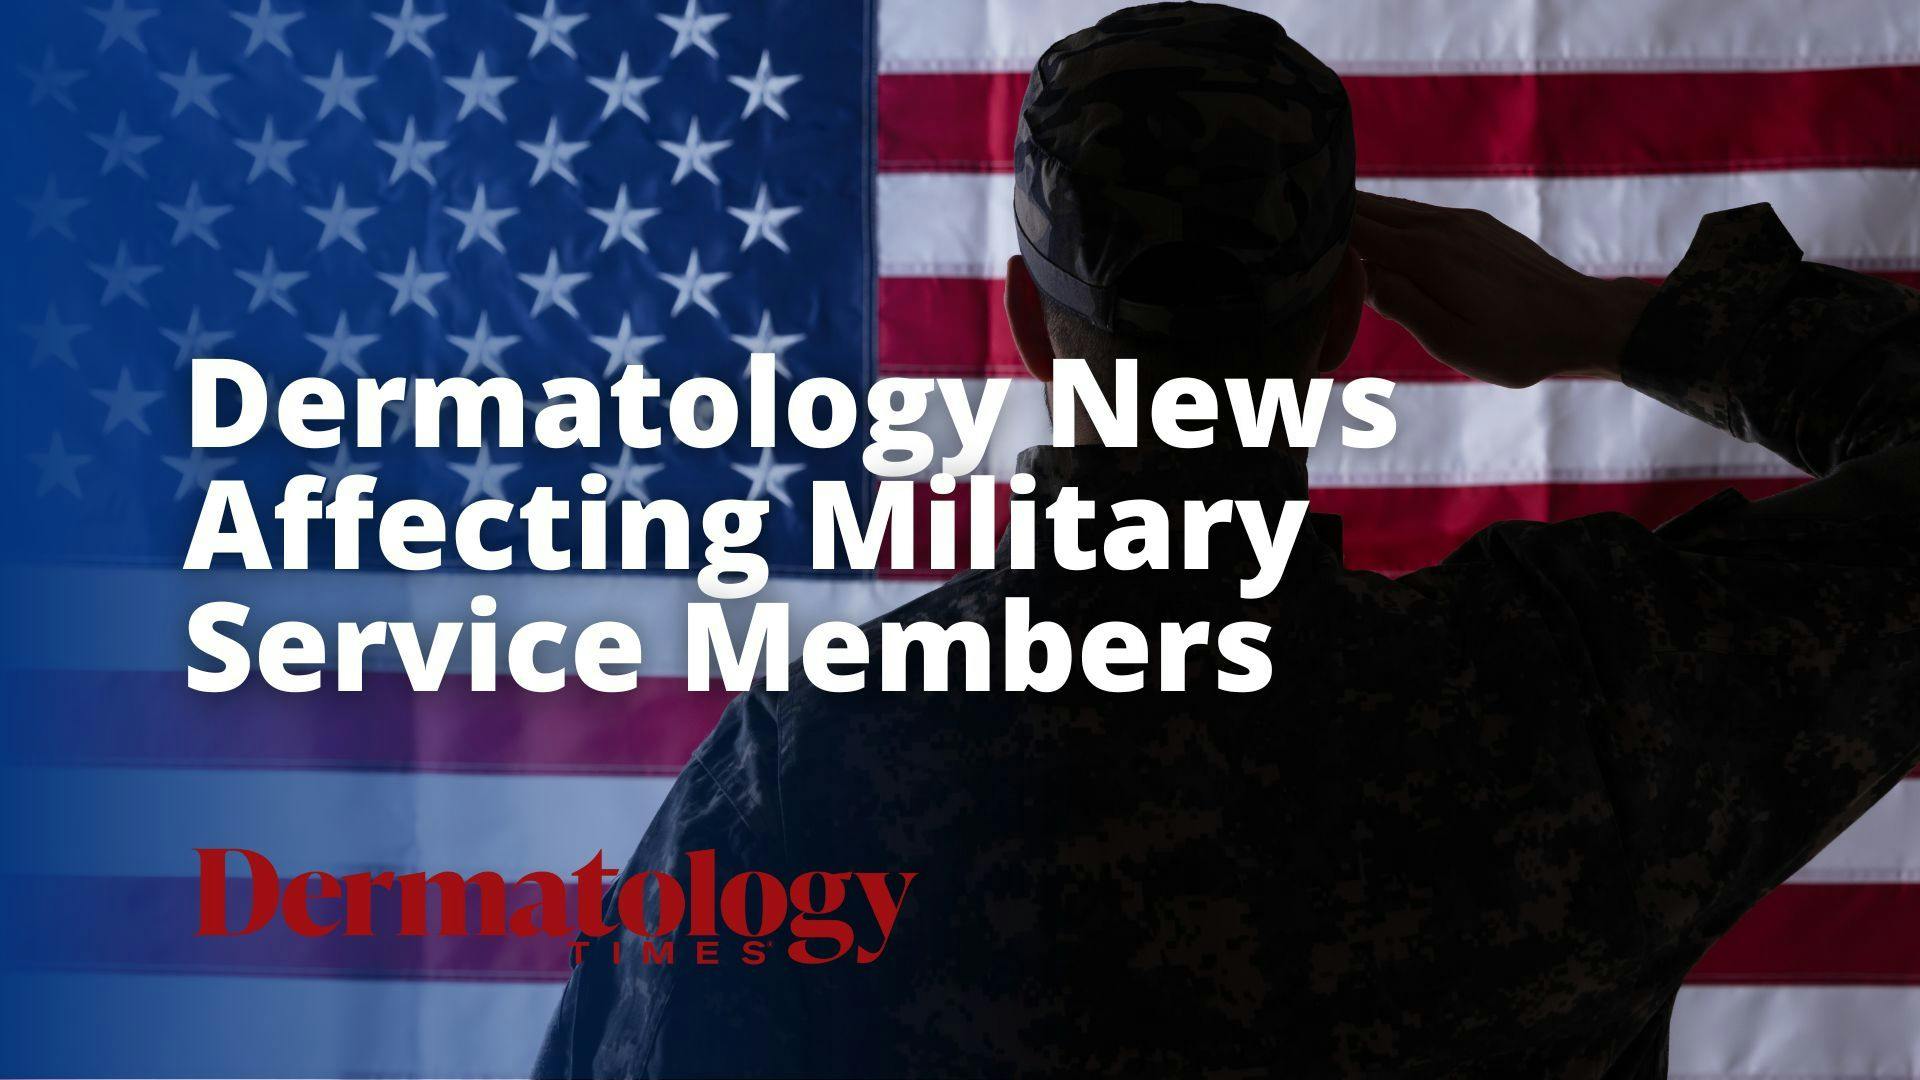 Dermatology News Affecting Military Service Members